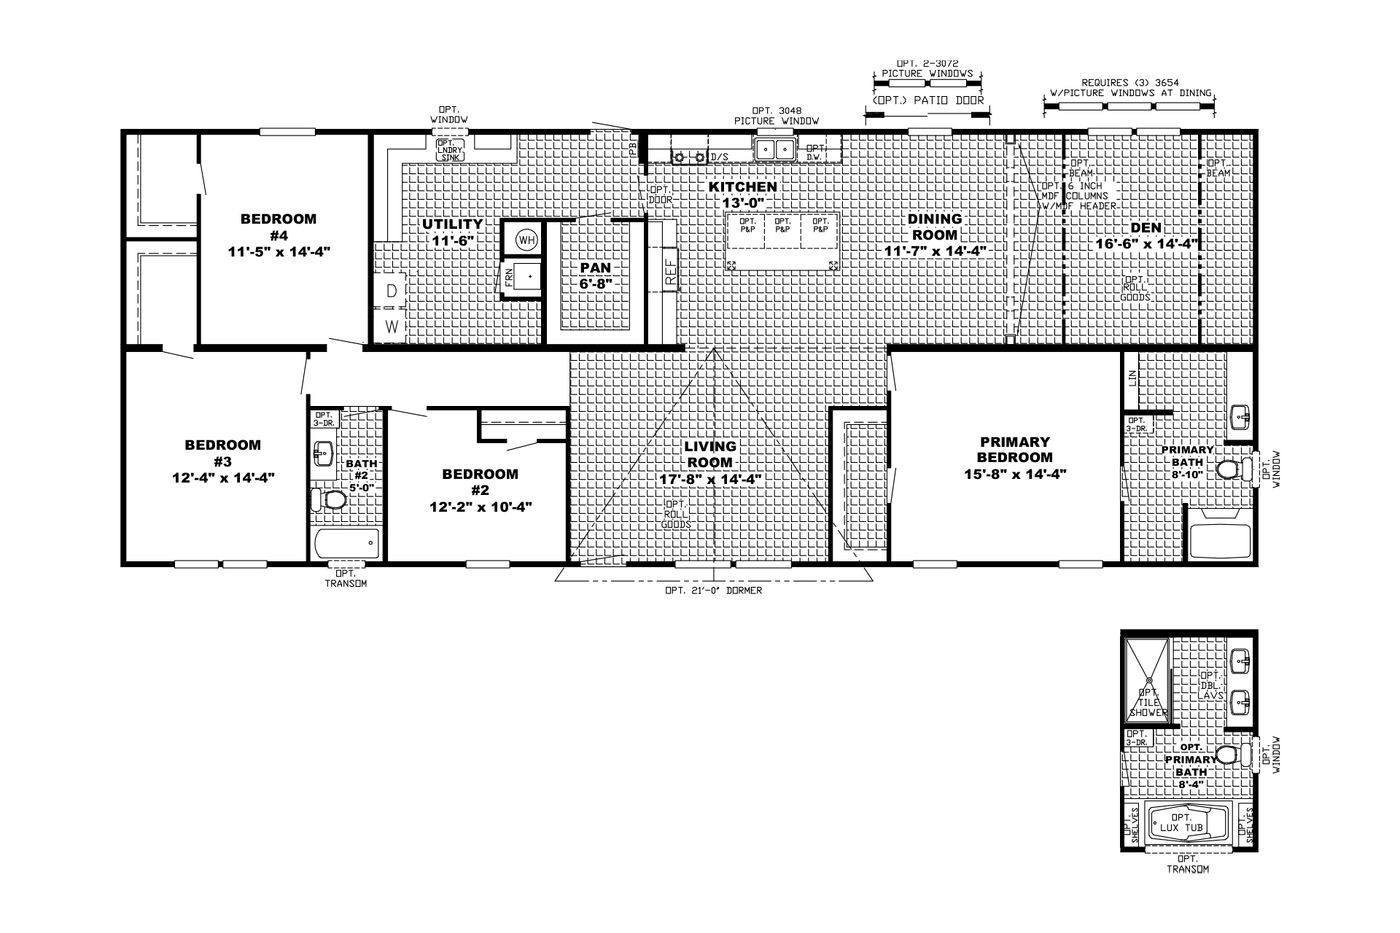 The THE MEADOWBROOK Floor Plan. This Manufactured Mobile Home features 4 bedrooms and 2 baths.